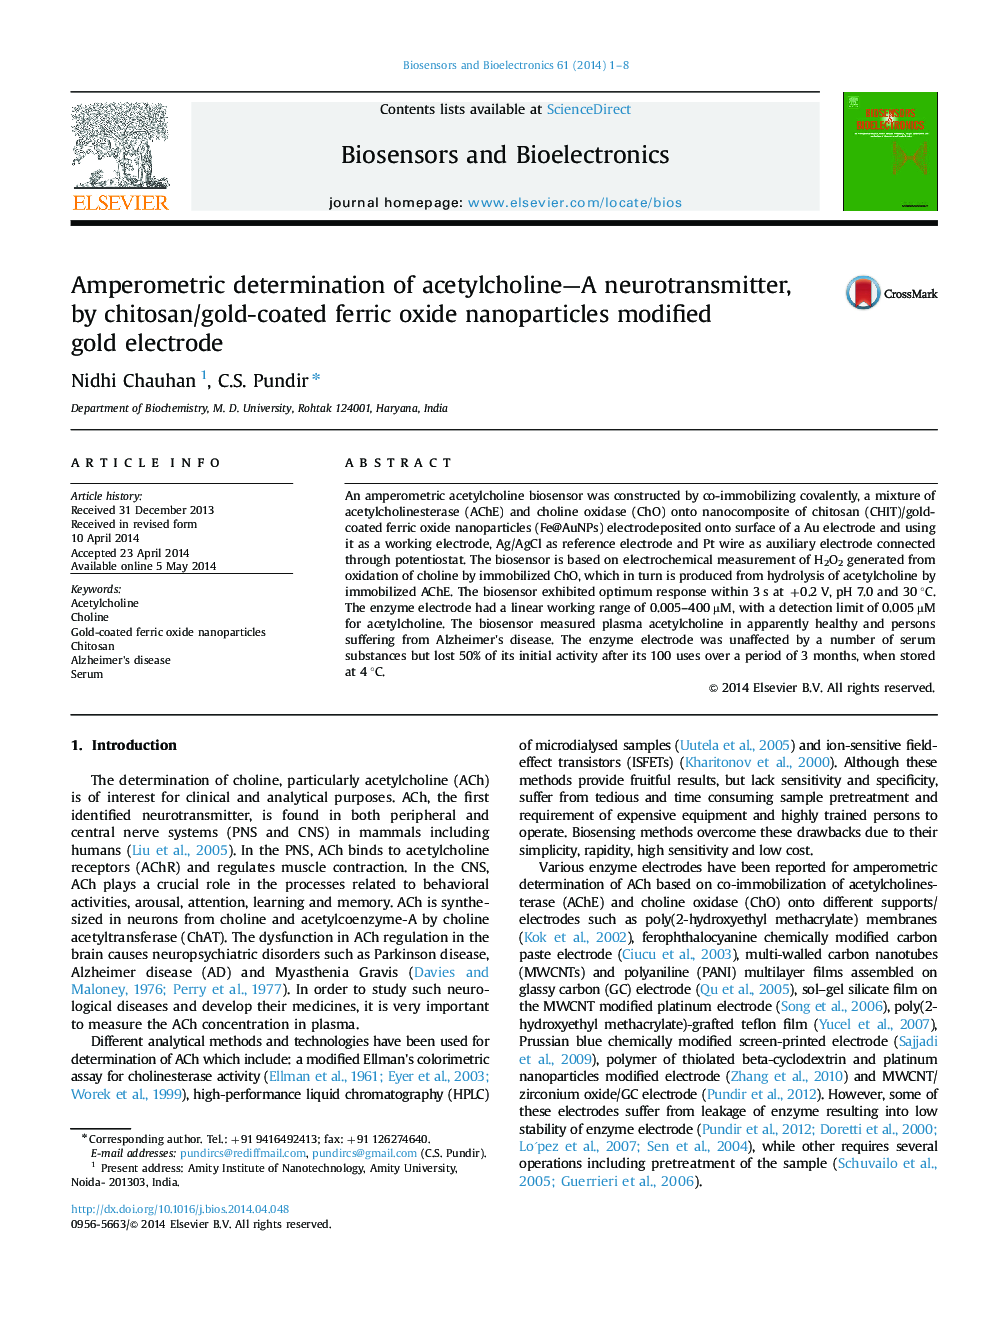 Amperometric determination of acetylcholine-A neurotransmitter, by chitosan/gold-coated ferric oxide nanoparticles modified gold electrode